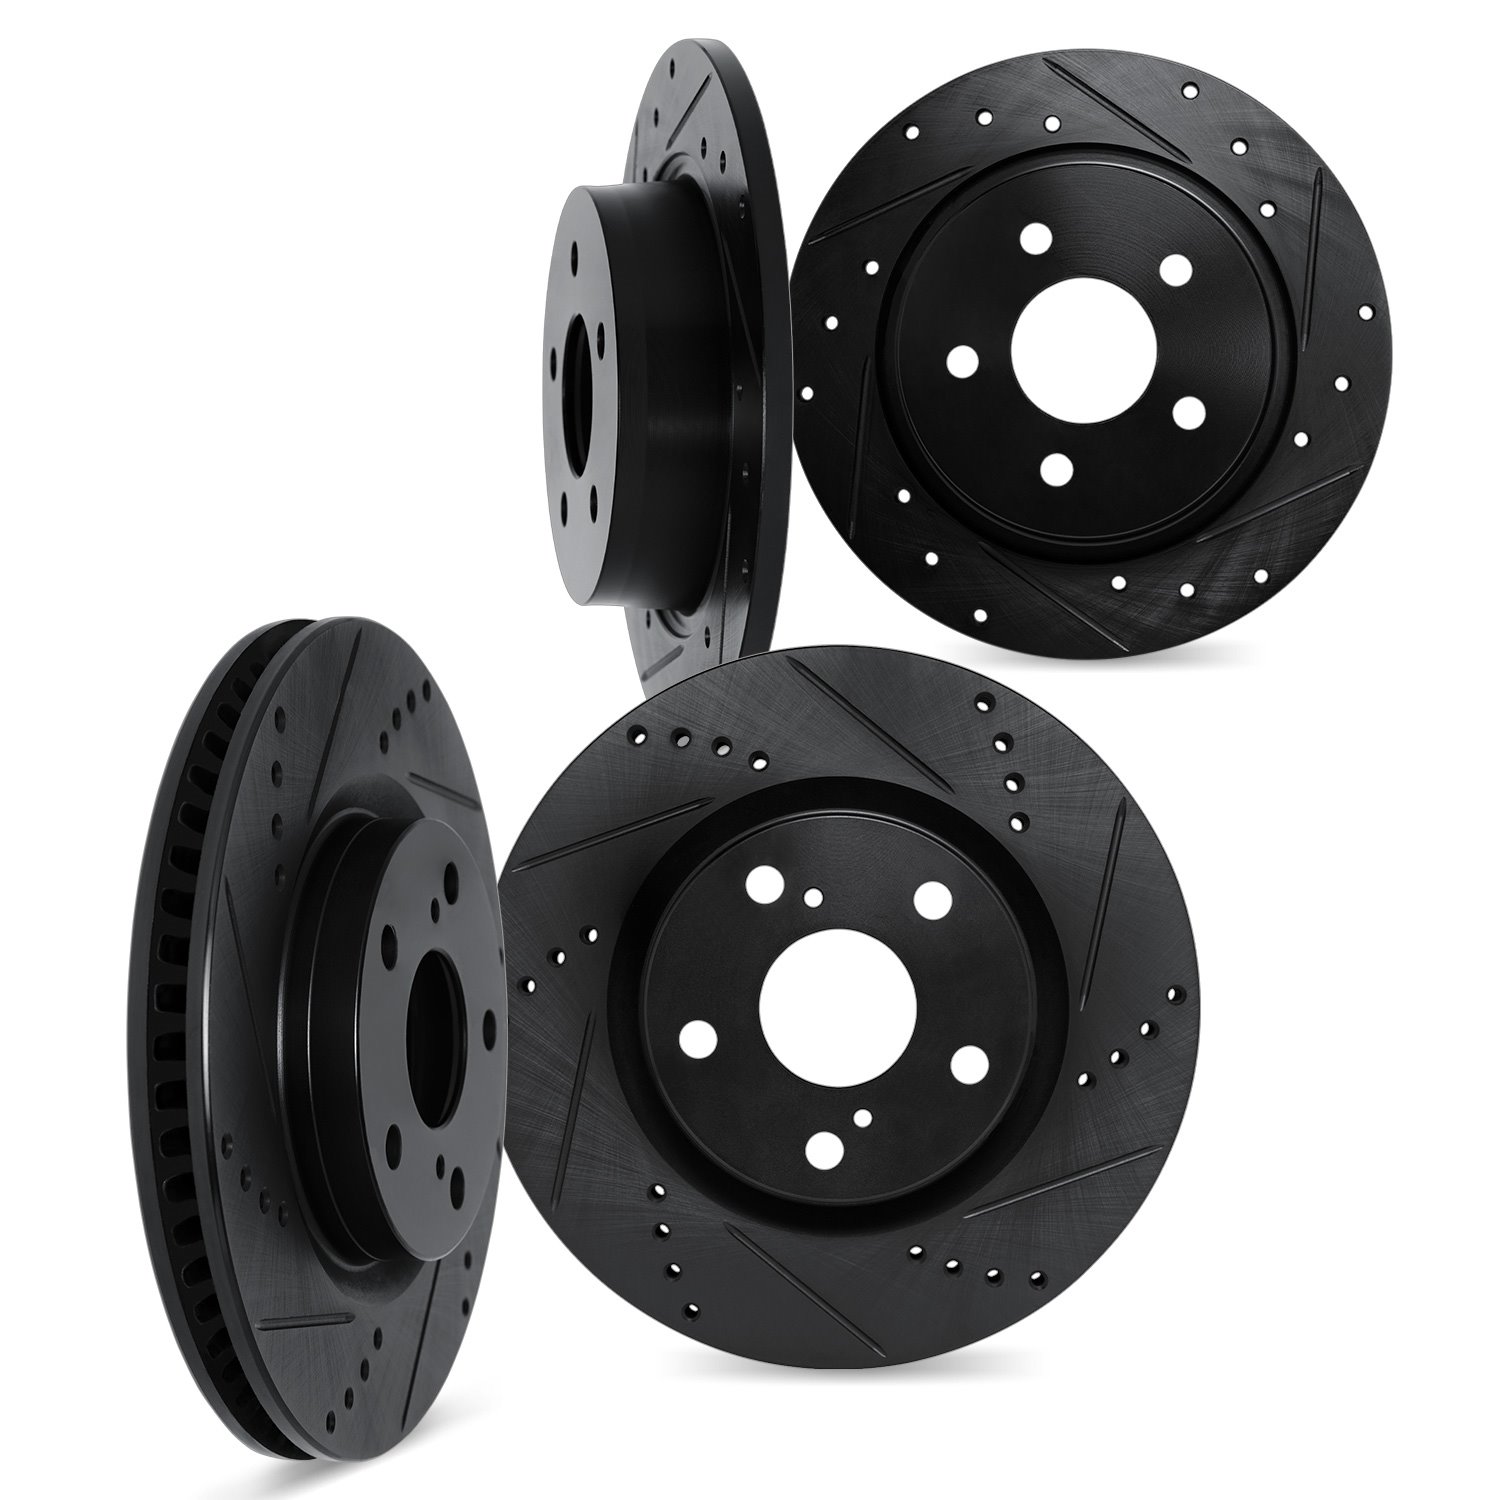 8004-73018 Drilled/Slotted Brake Rotors [Black], 1996-2001 Audi/Volkswagen, Position: Front and Rear